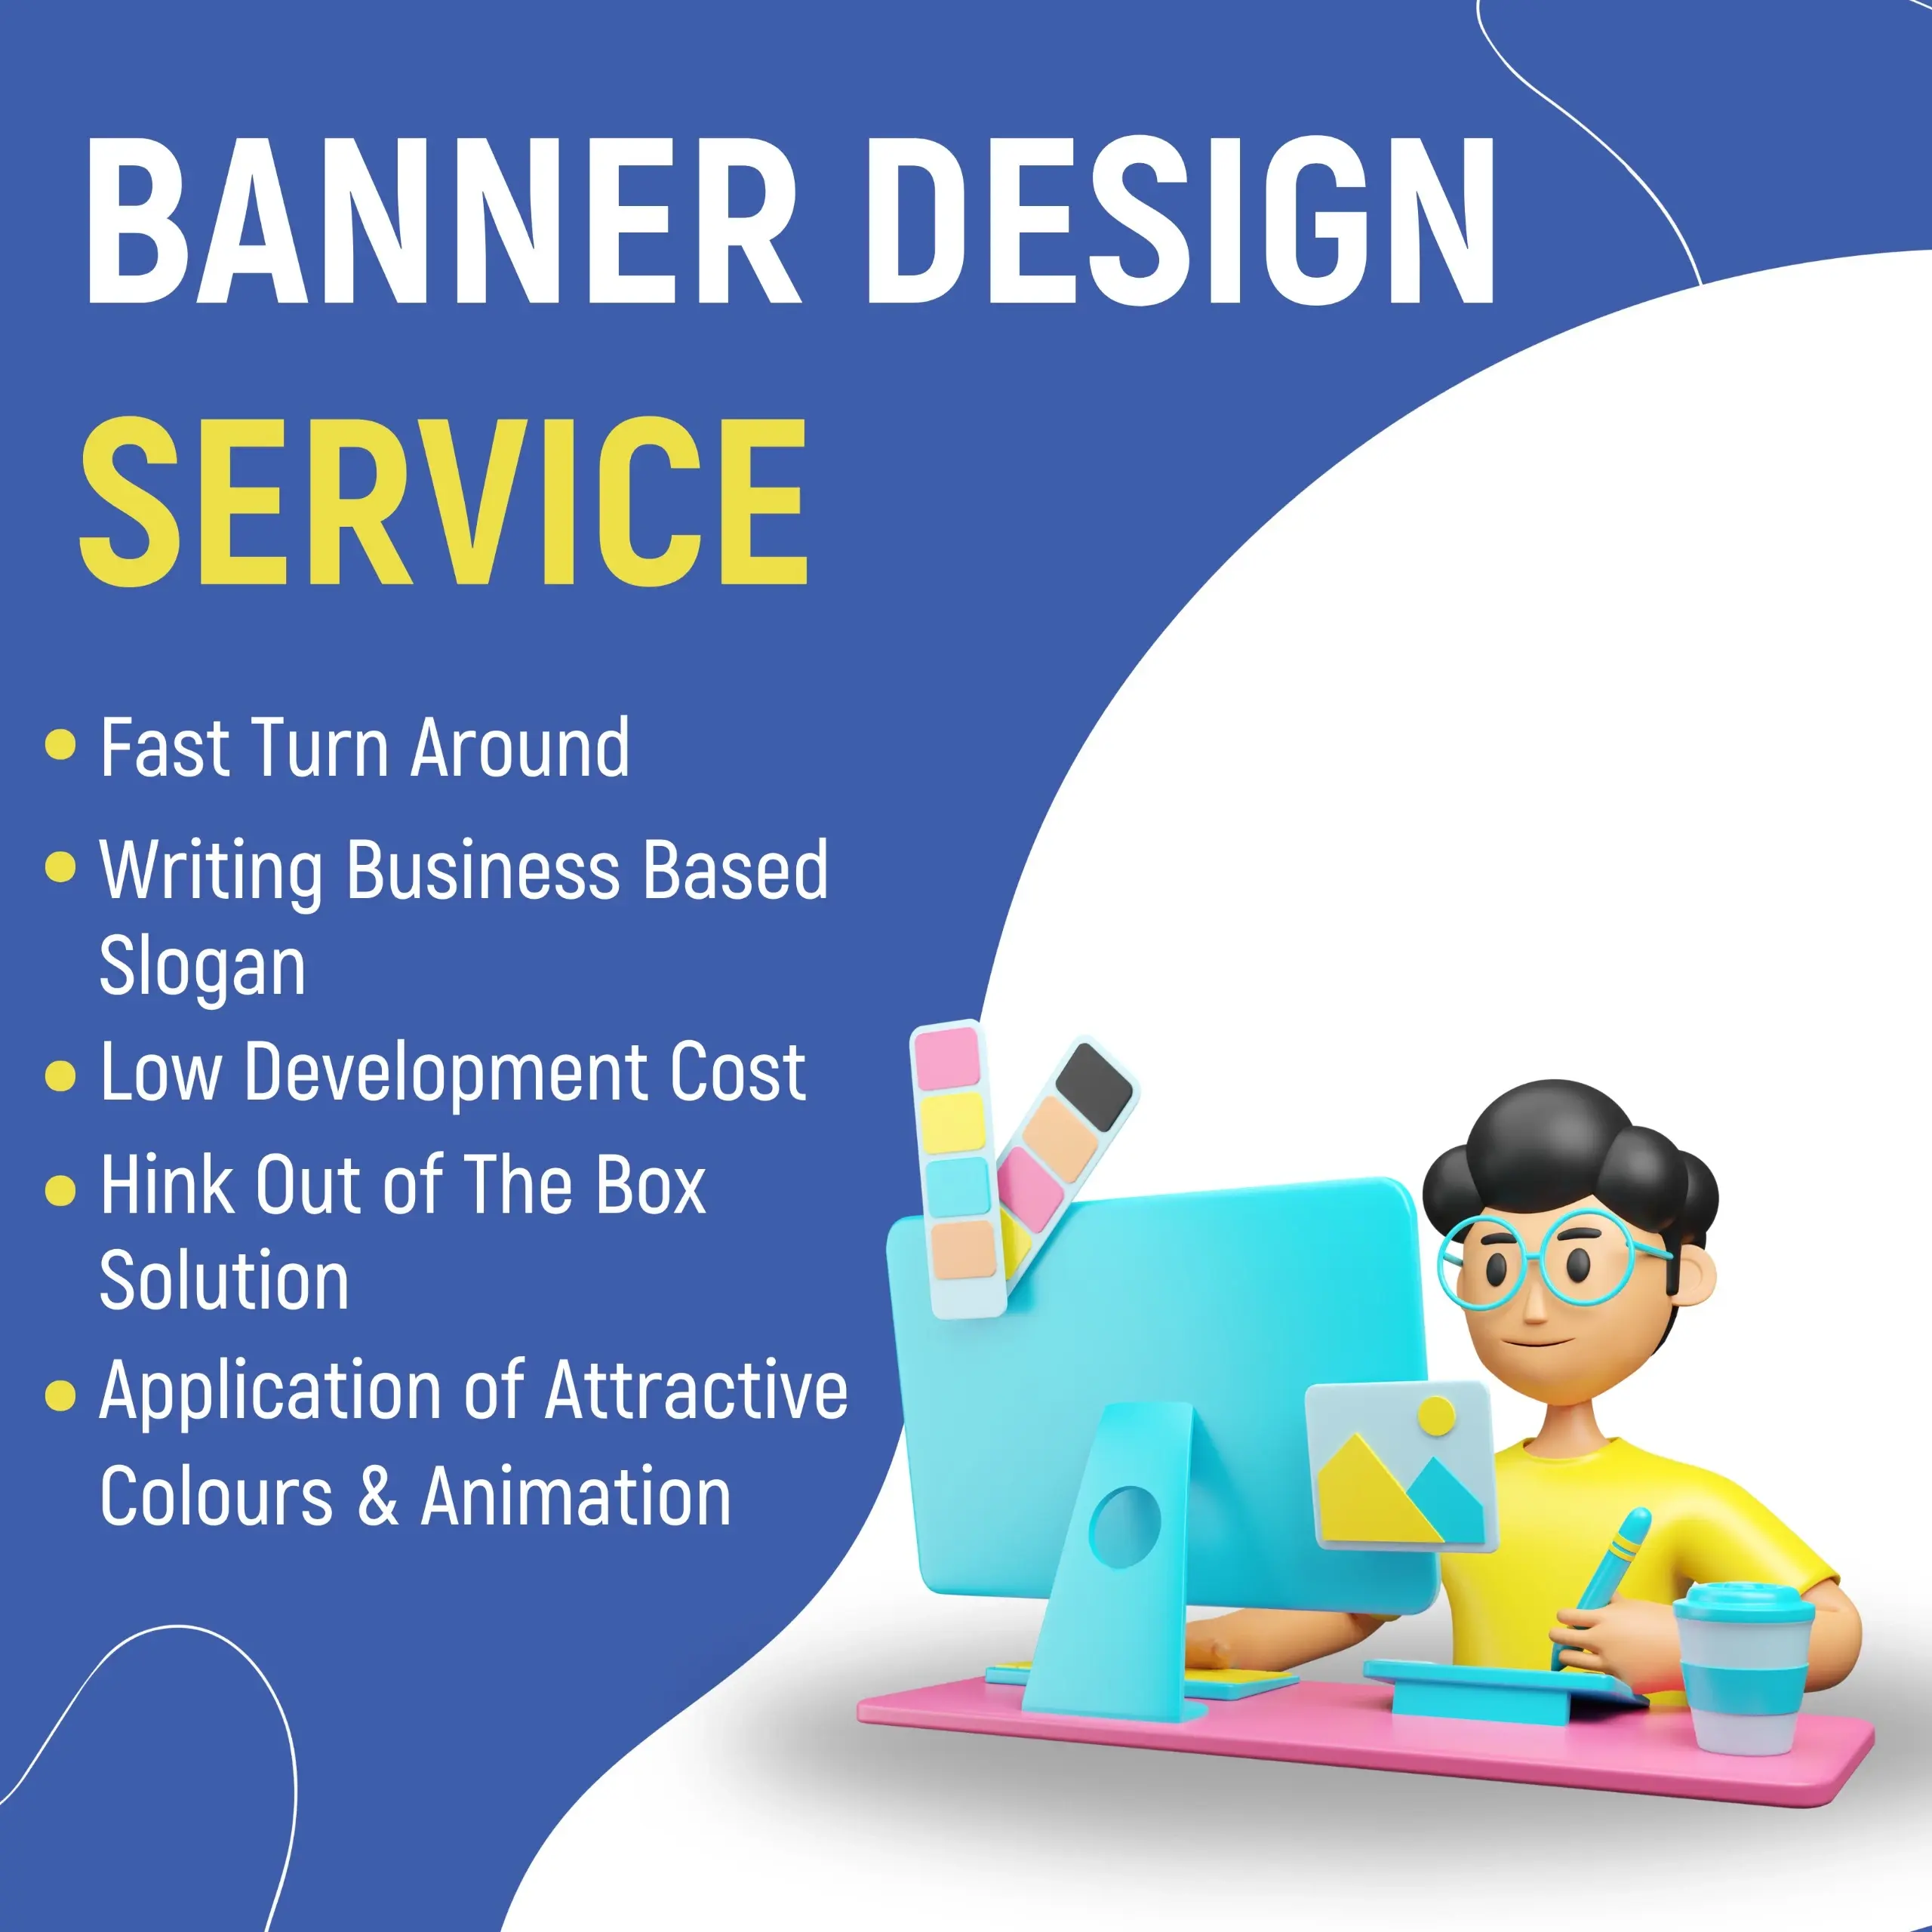 Professional Banner Designing Services to Boost Your Marketing Efforts